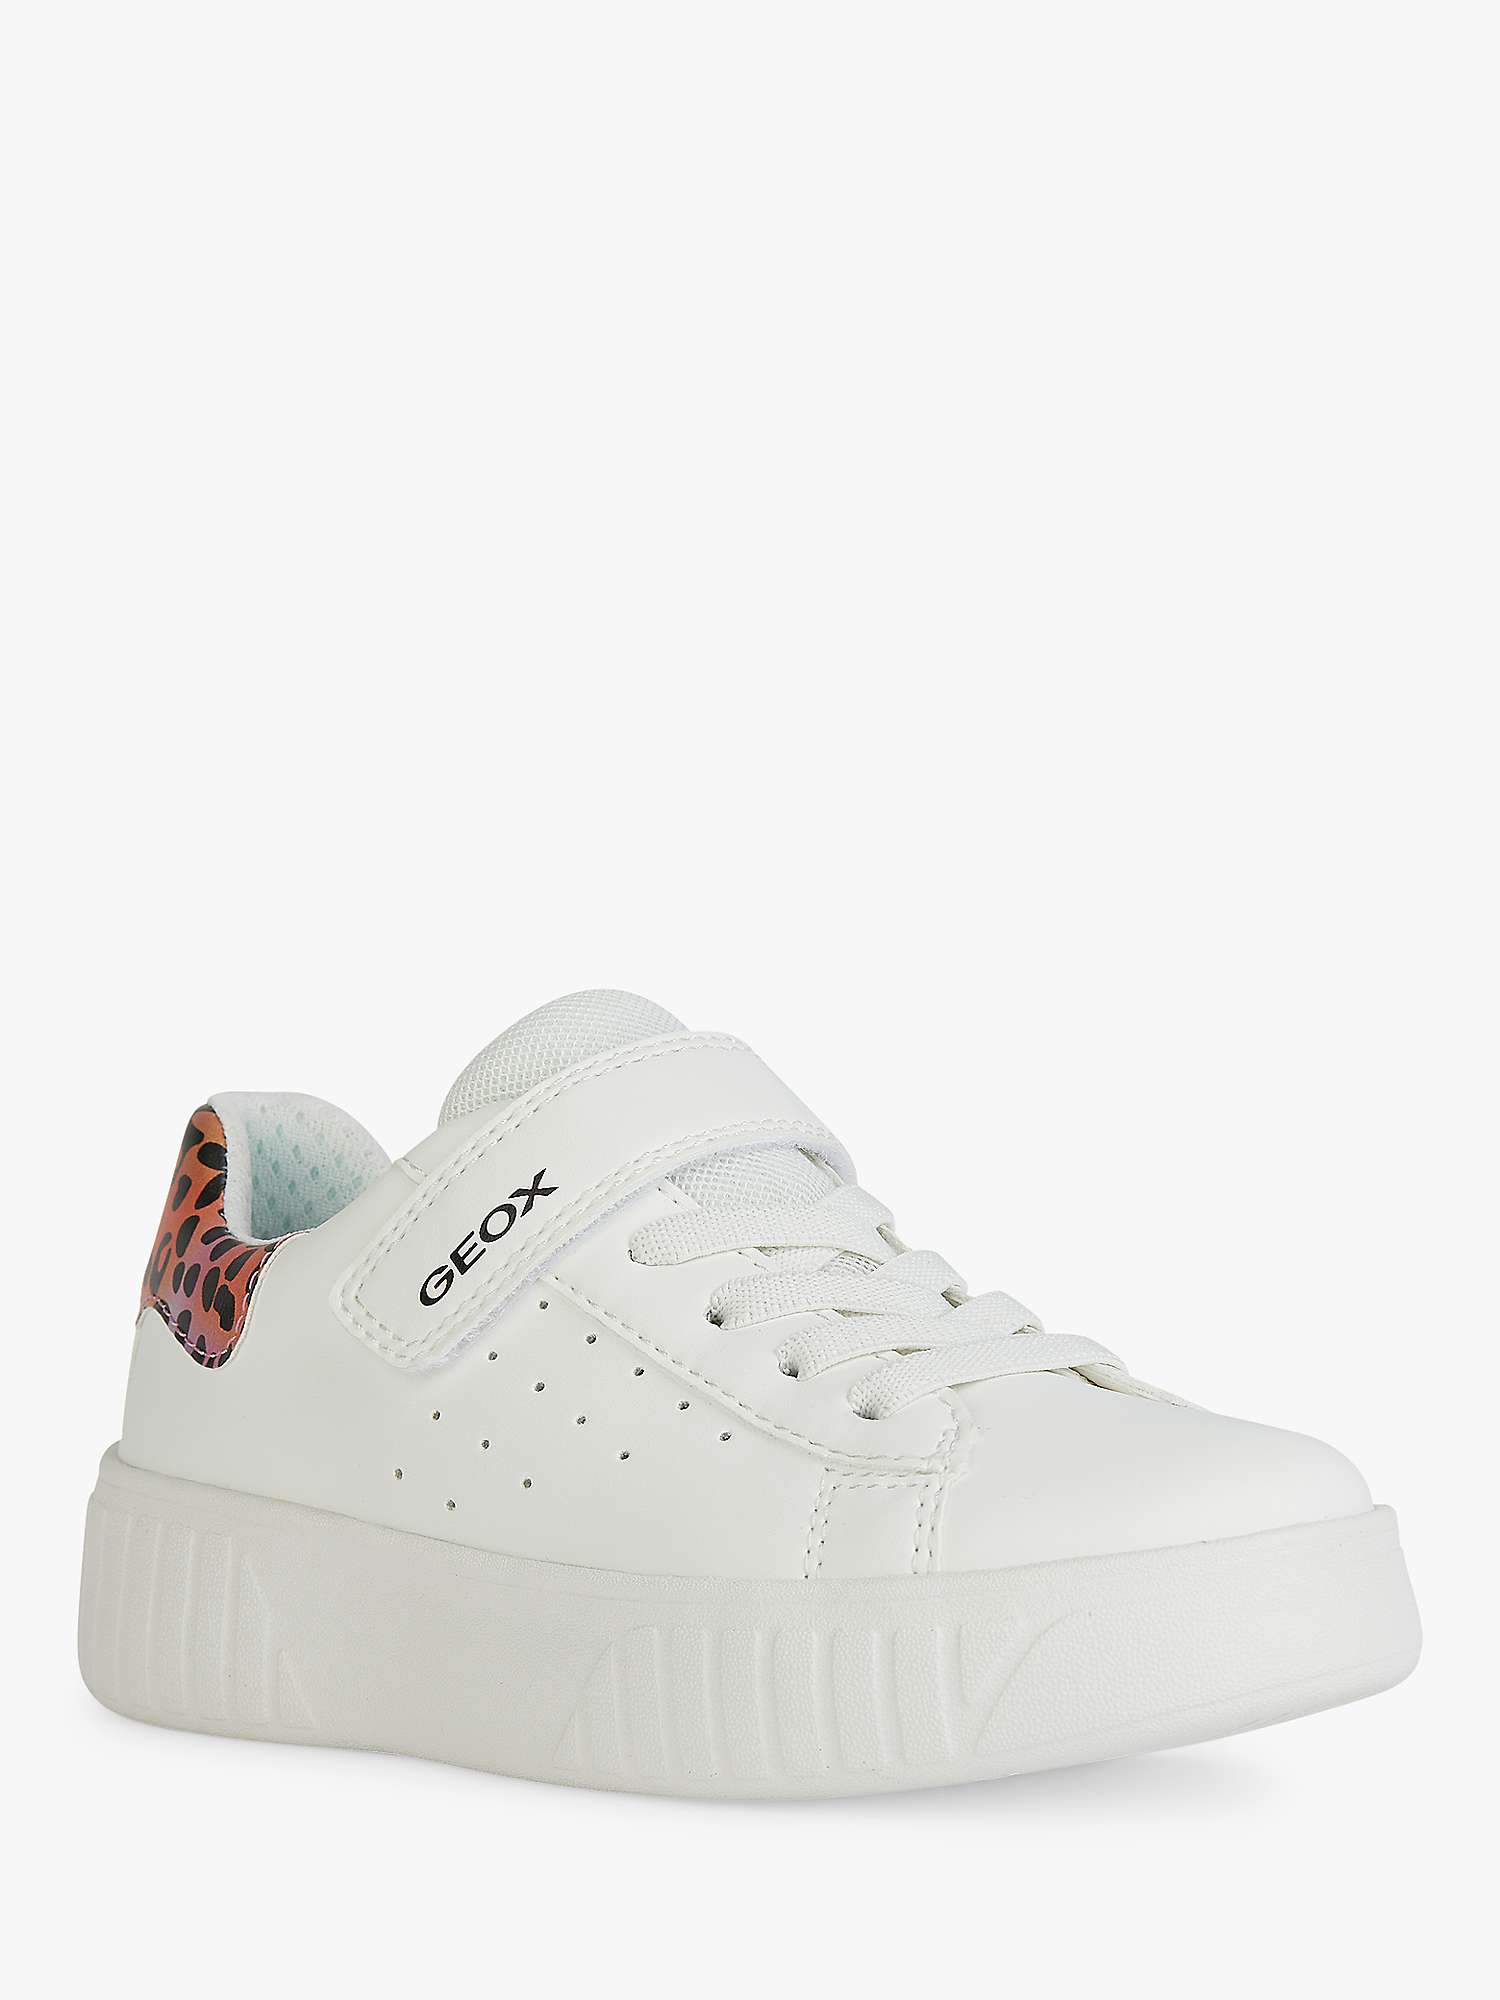 Buy Geox Kids' Mikiroshi Leopard Print Detail Trainers, White/Multi Online at johnlewis.com